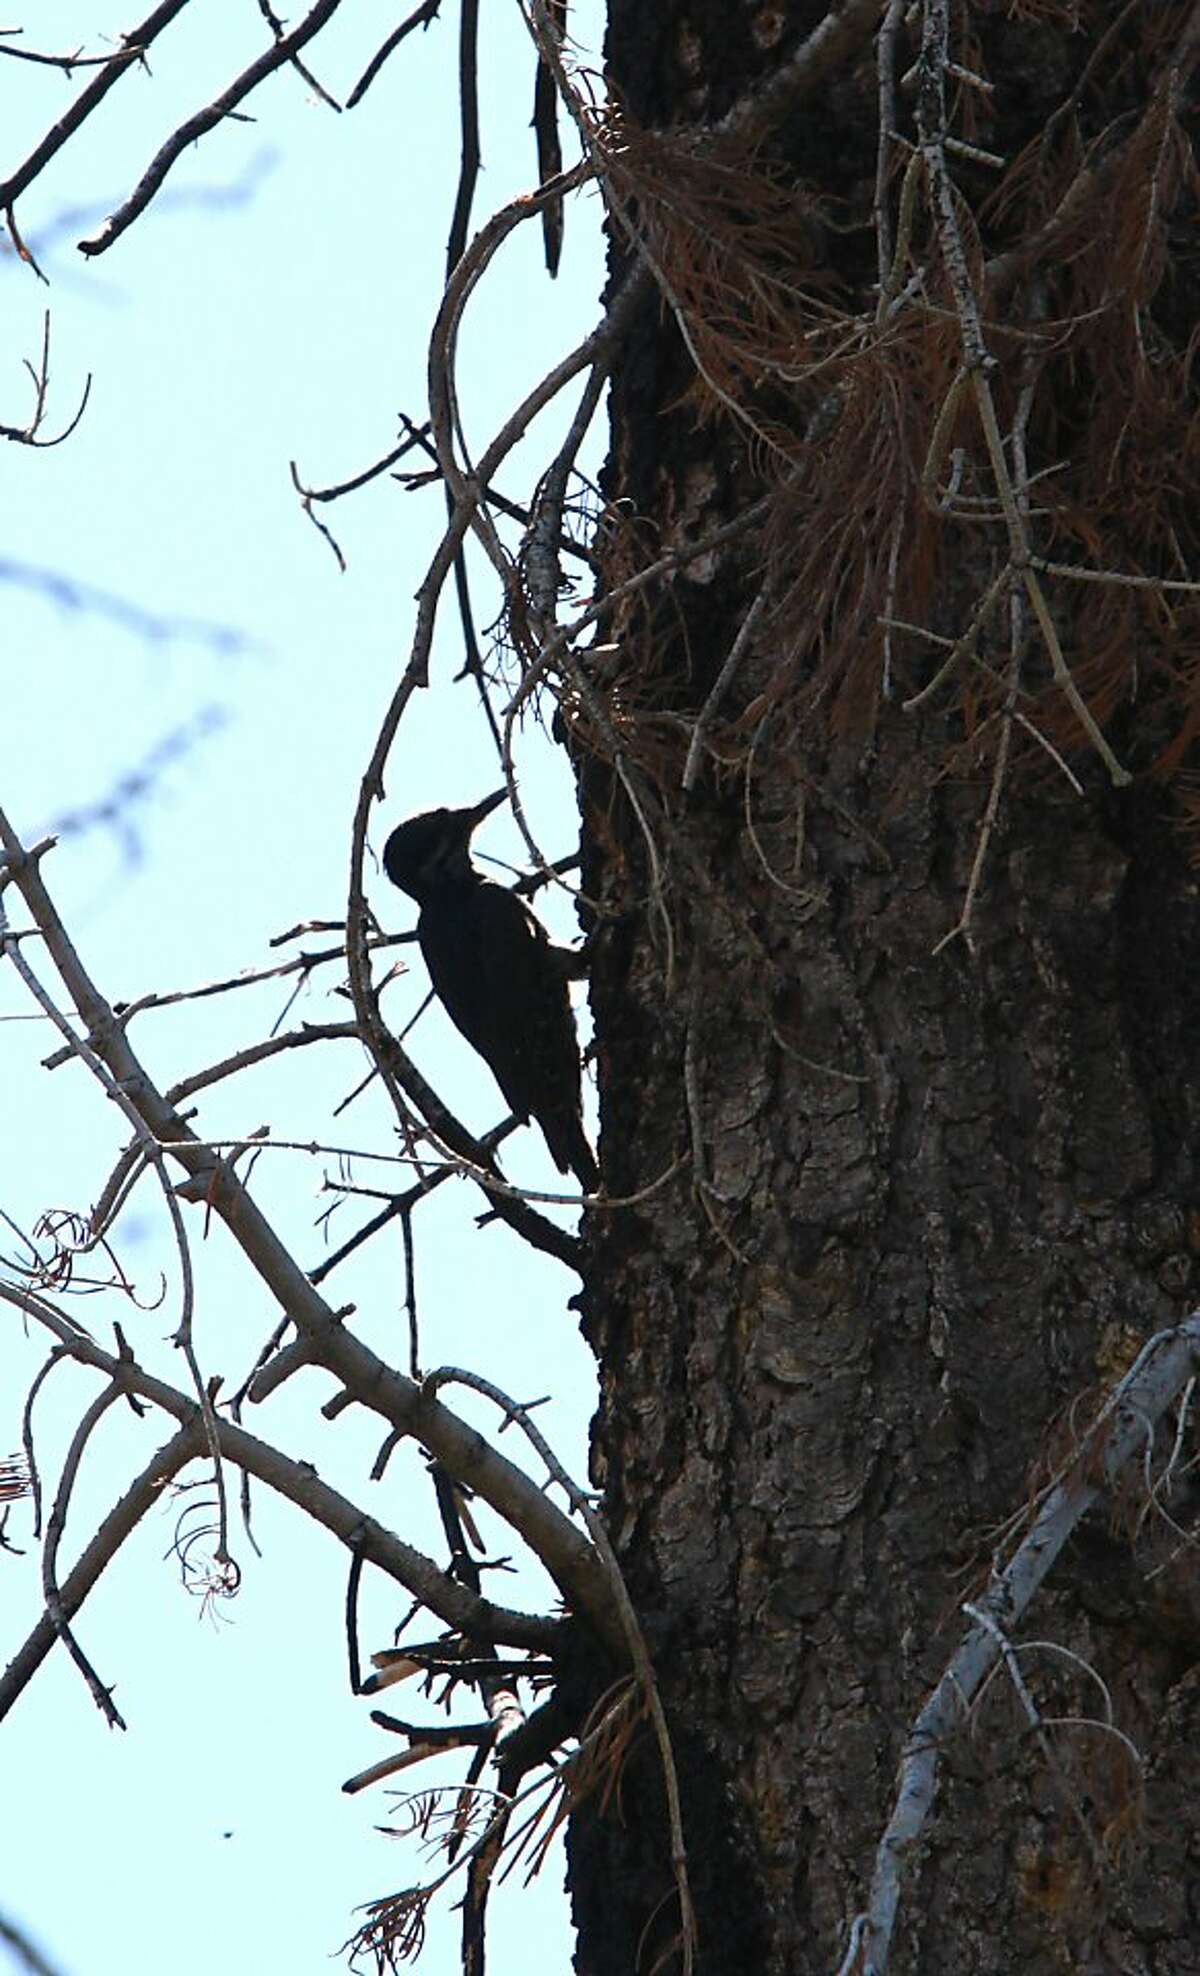 FILE - In this July 6, 2010 file photo, a rare black-backed woodpecker is seen in the burned remains of the Angora Fire near South Lake Tahoe, Calif. Conservationists are seeking Endangered Species Act protection for the rare woodpecker that feeds on beetles in burned forests. Four groups filed the listing petition Wednesday, May 2, 2012, for the black-backed woodpecker in the Black Hills, the Sierra Nevada and Eastern Cascades of Oregon. (AP Photo/Rich Pedroncelli, File)